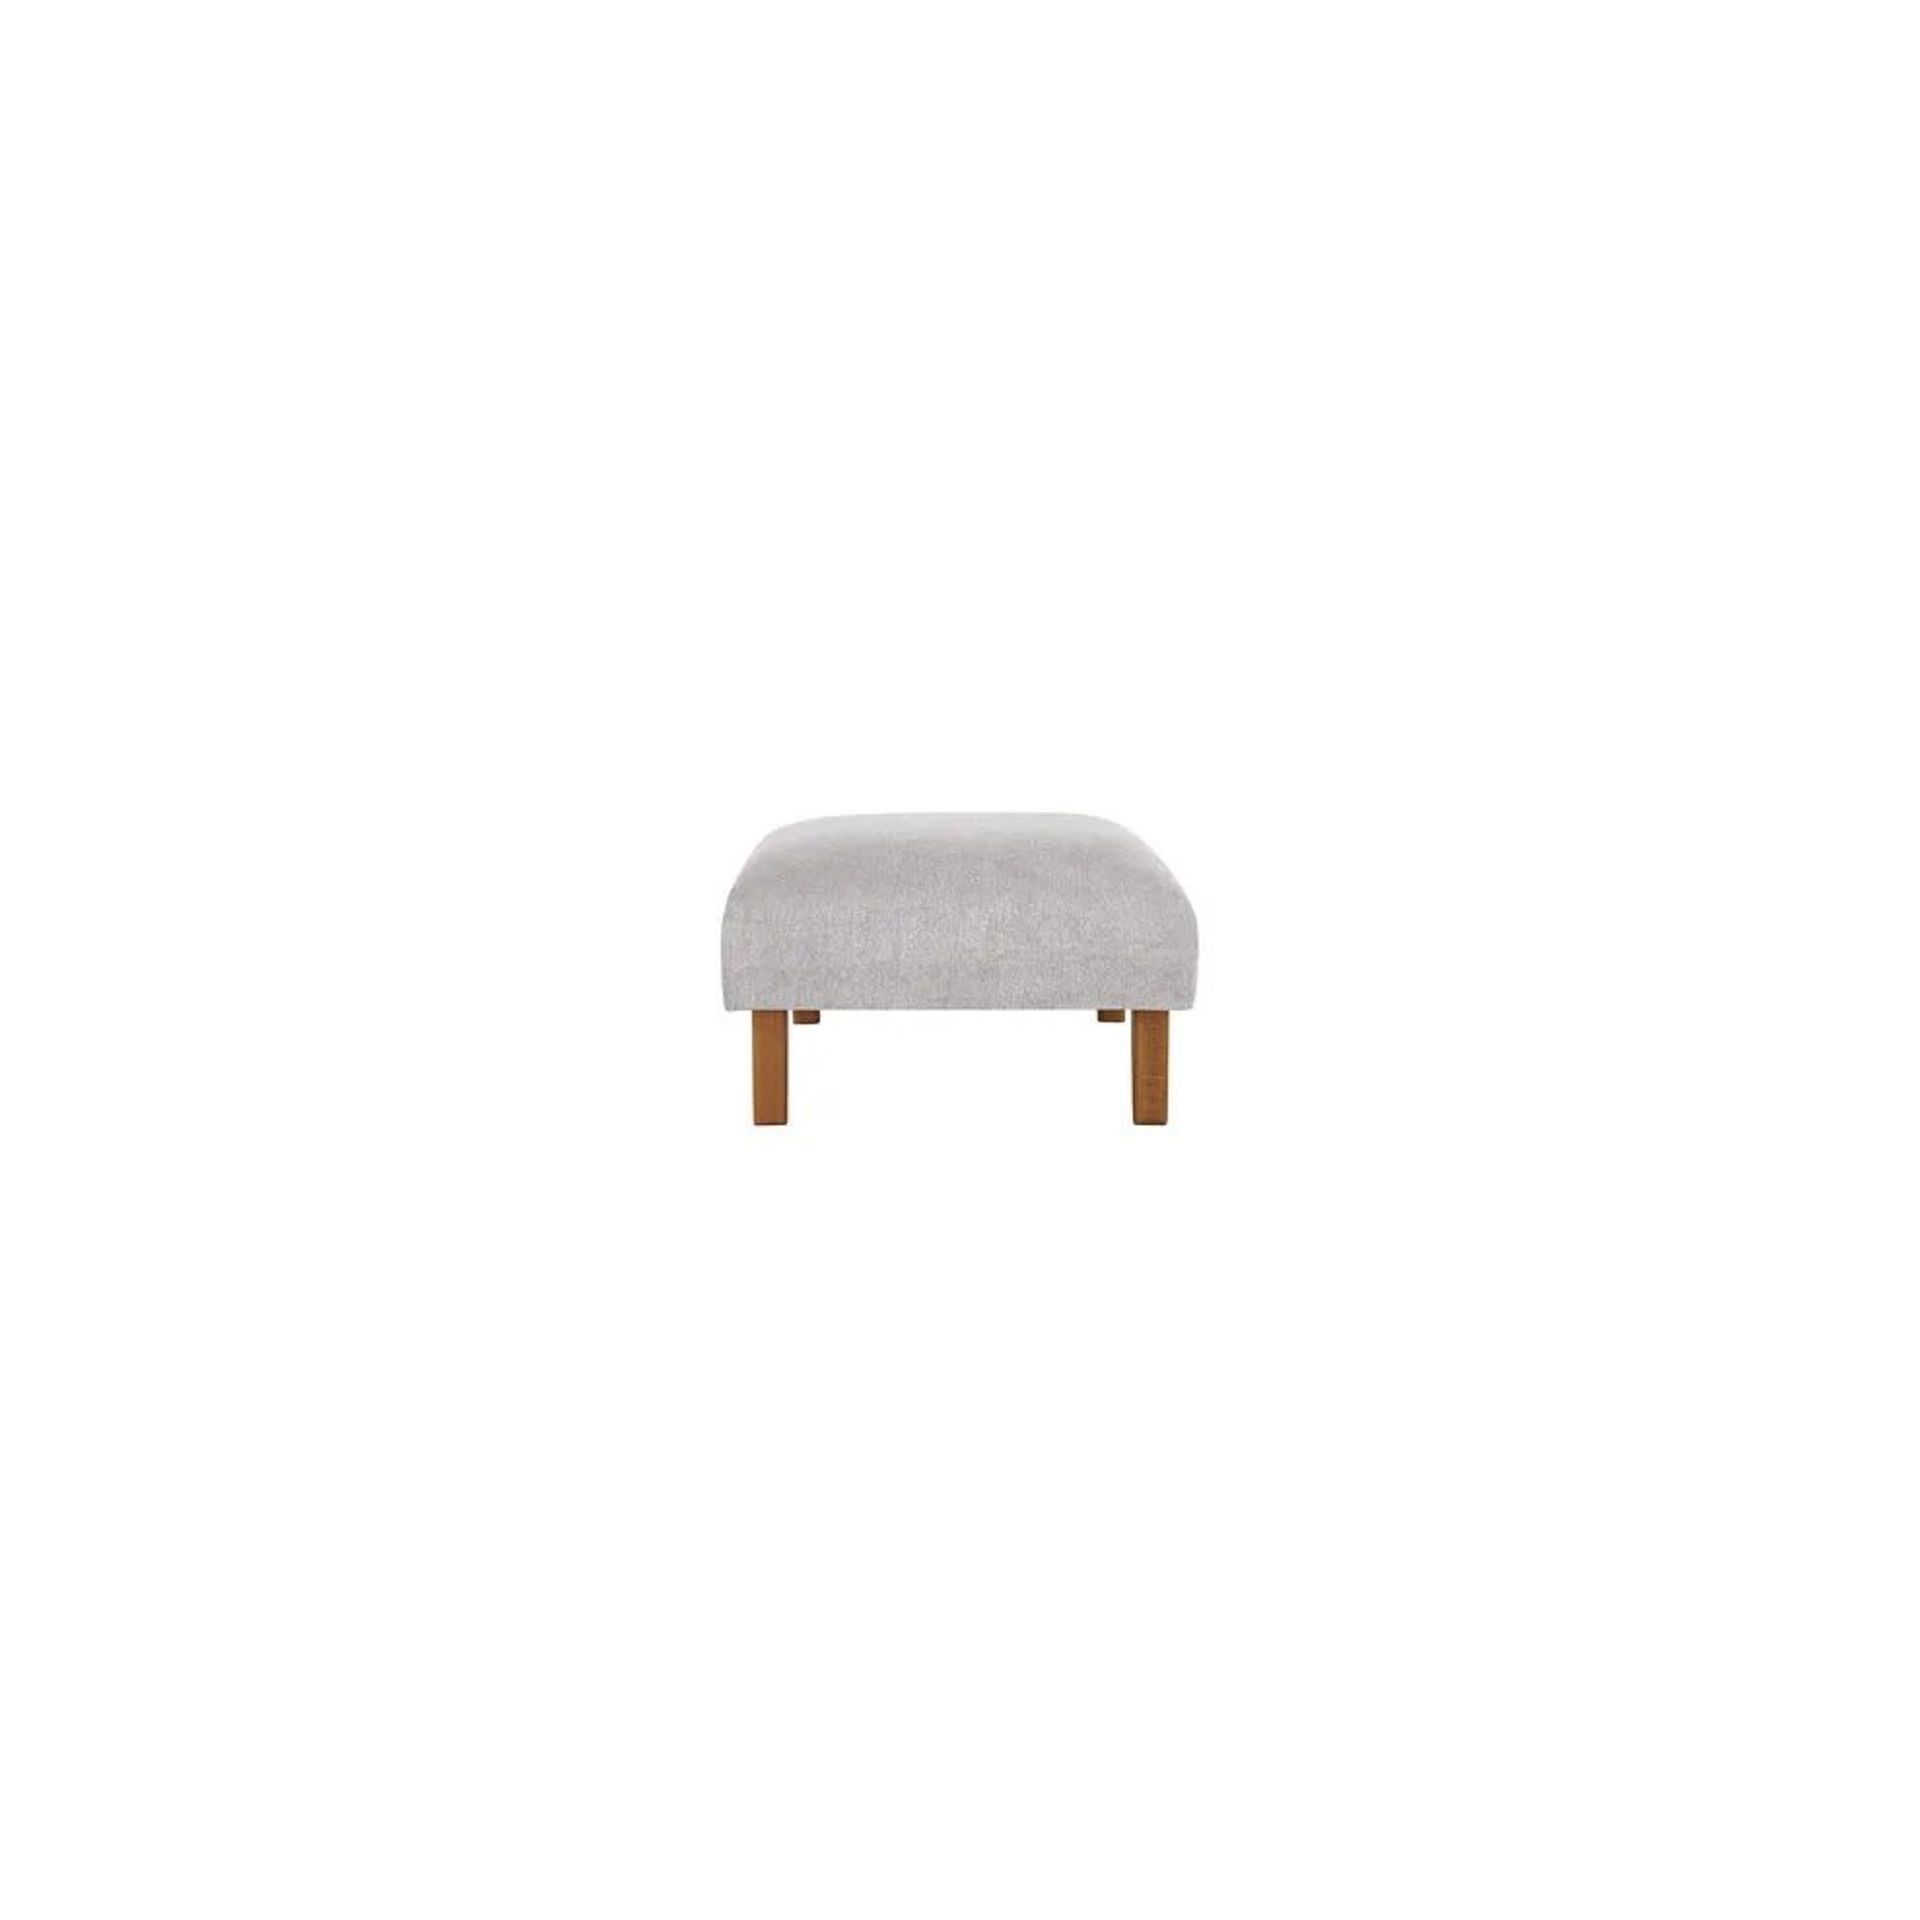 BRAND NEW JASMINE Footstool - CAMPO SILVER FABRIC. RRP £349. Built with a sturdy hardwood frame - Image 3 of 6